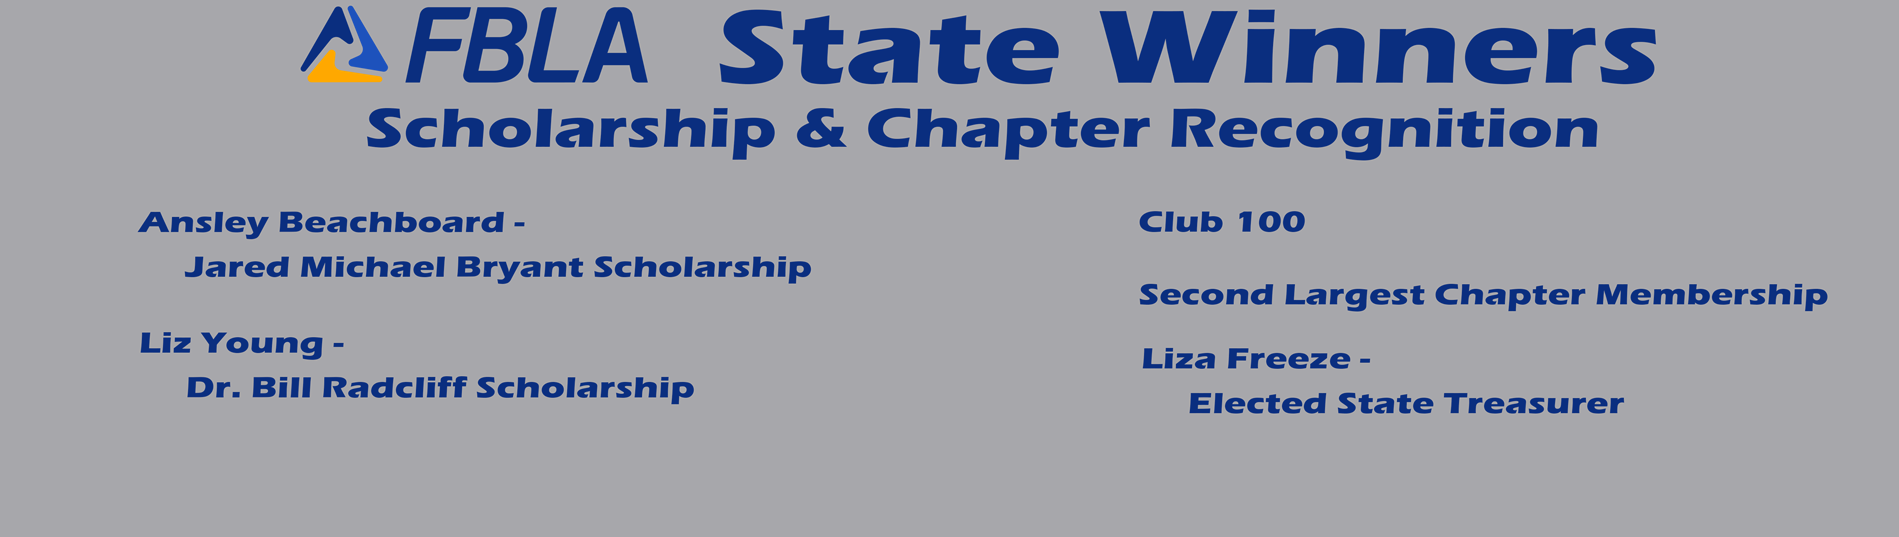 FBLA Scholarship & Chapter Recognition